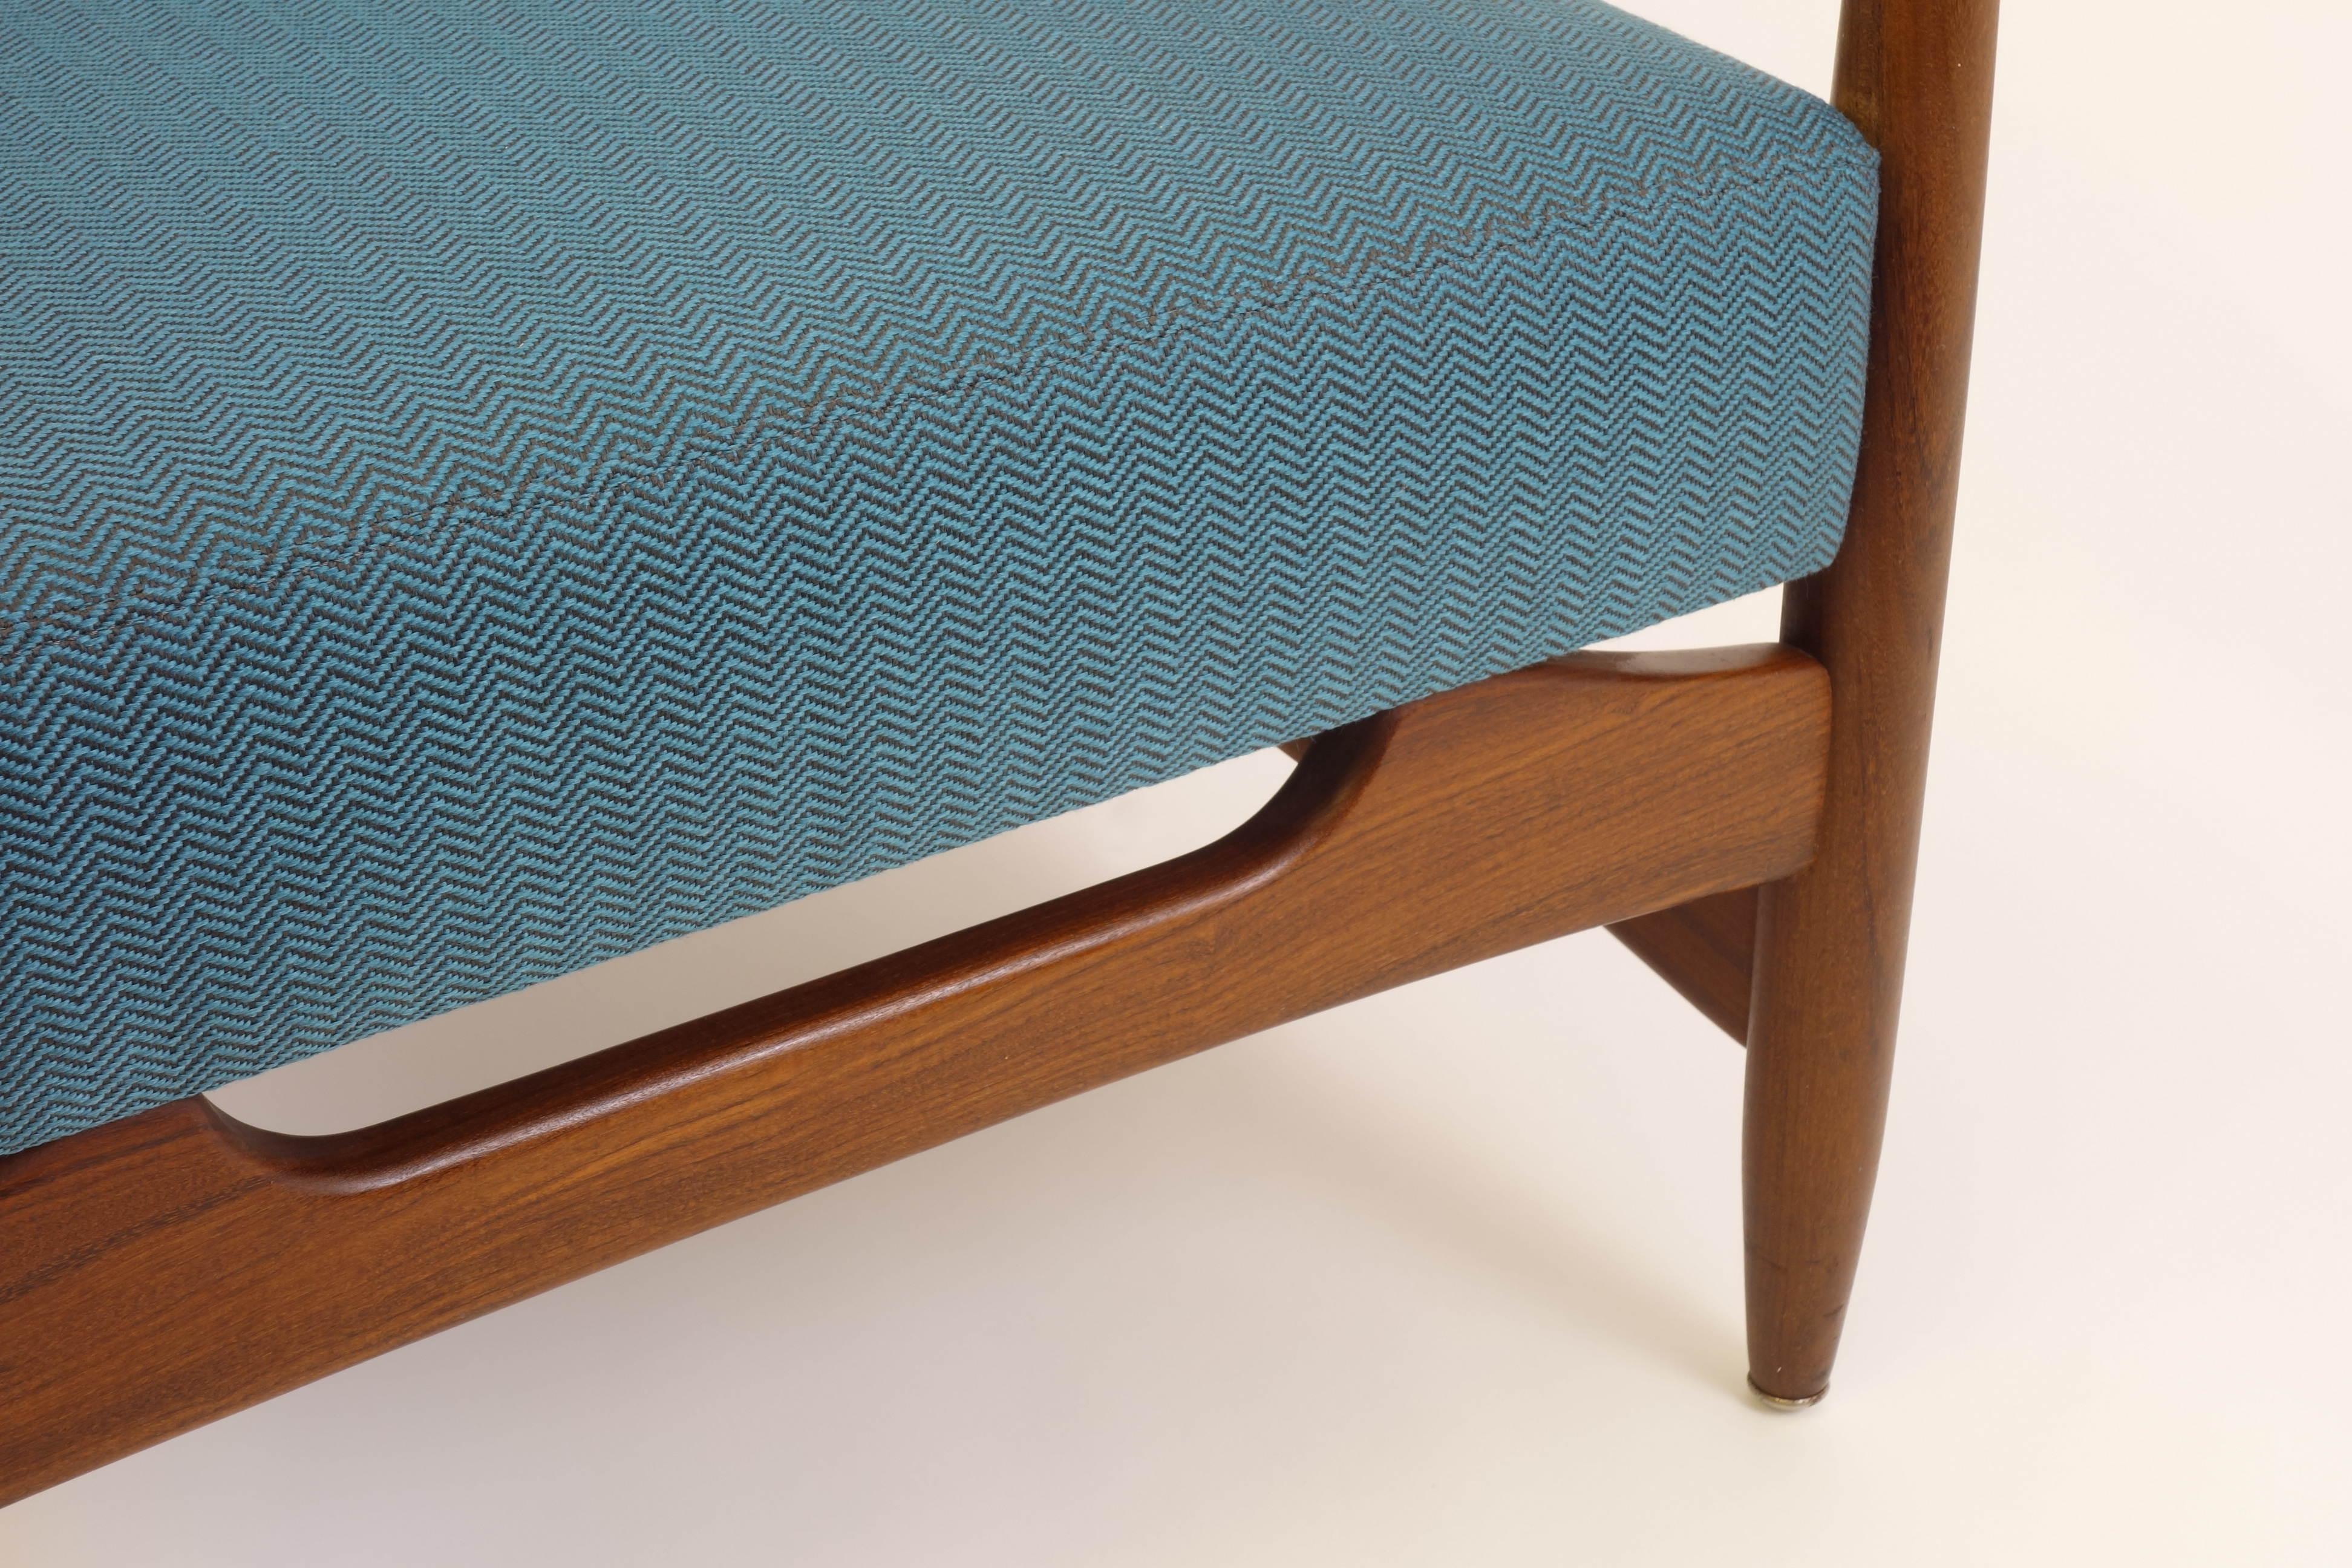 A captivating armchair offering authentic Danish design in a more than tasteful color composition. The upholstery was newly covered with a teal fabric made of herringbone pattern, which is excellent at offering a subtle contrast to the warm wood